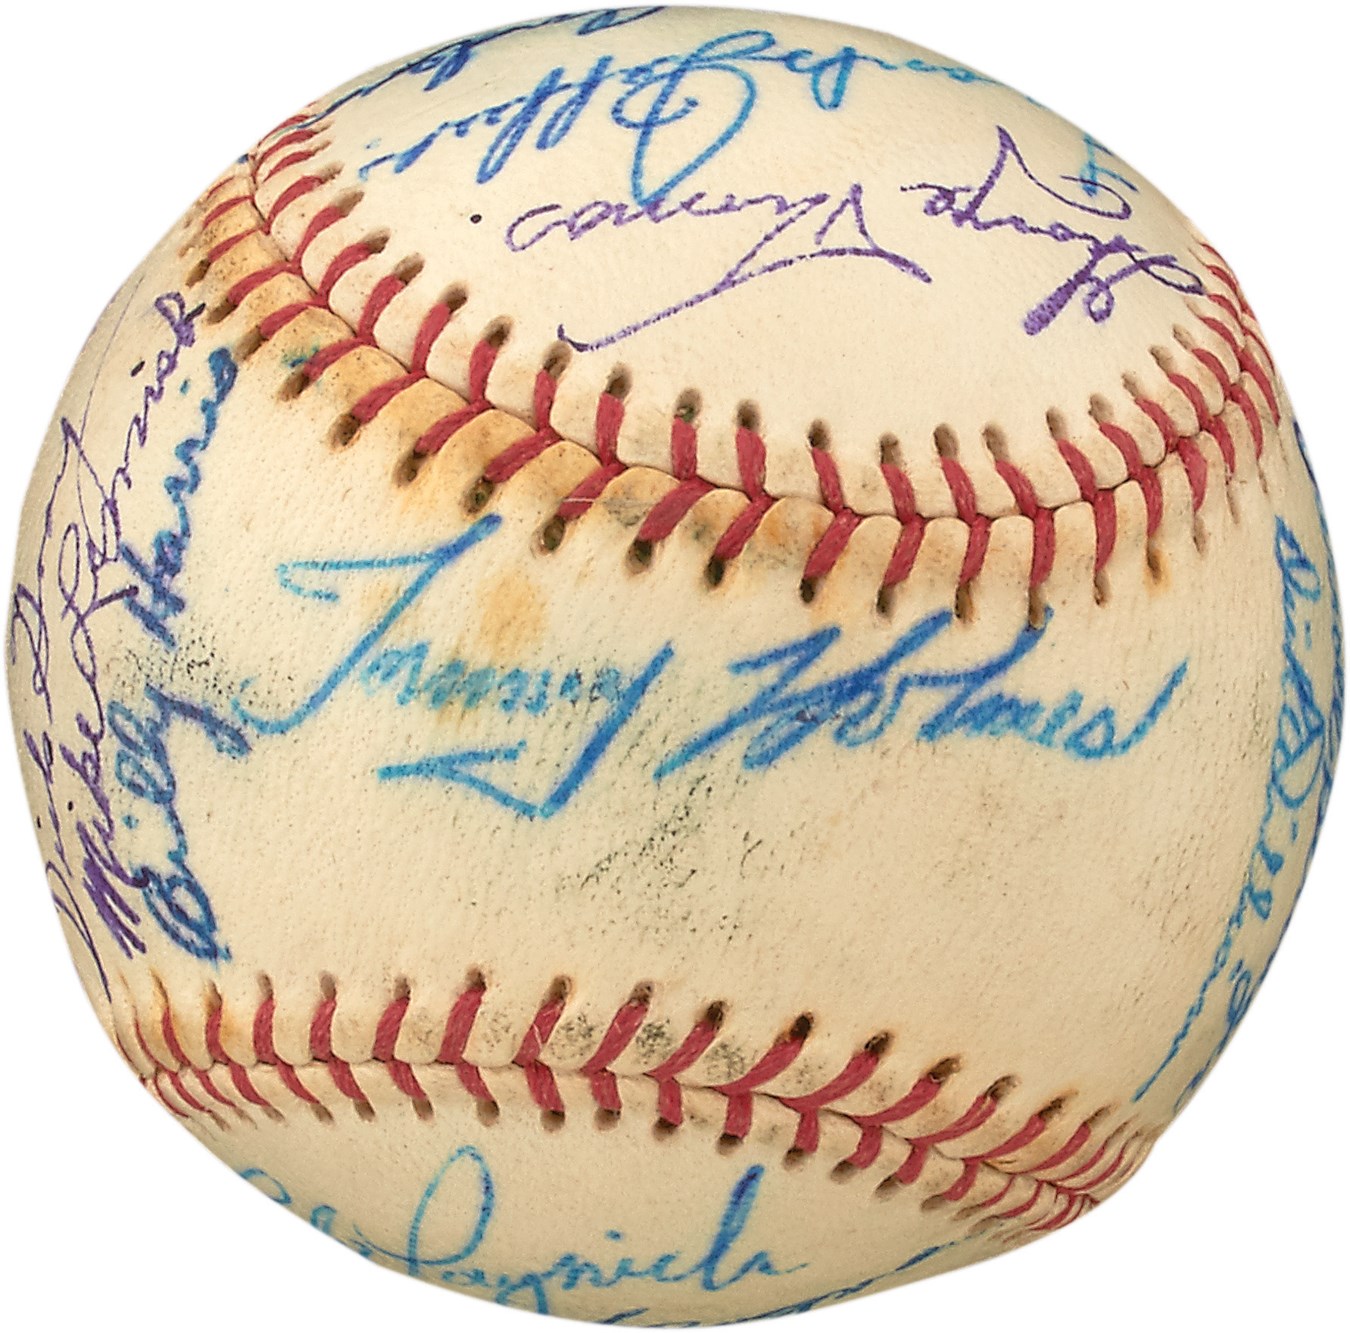 Circa 1958 Montreal Royals Team-Signed Baseball with Early Sparky Anderson